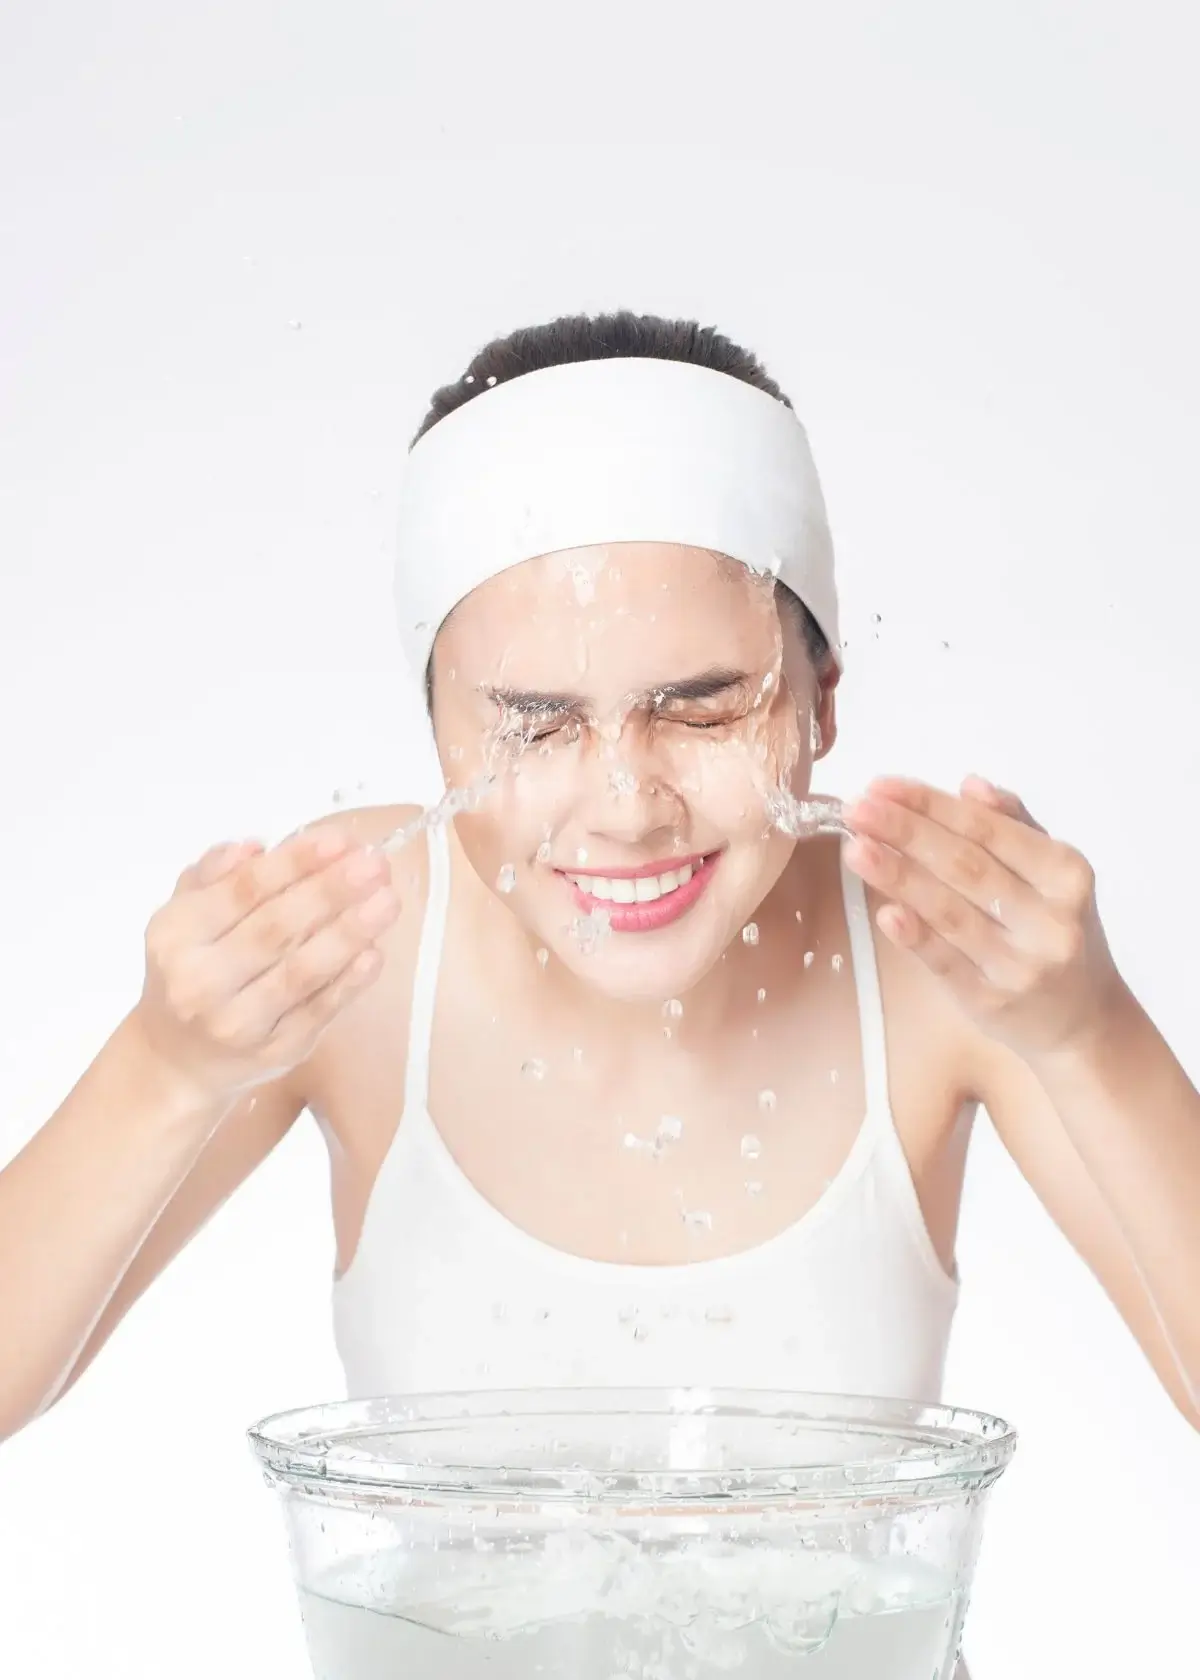 What are the correct steps for skin care?